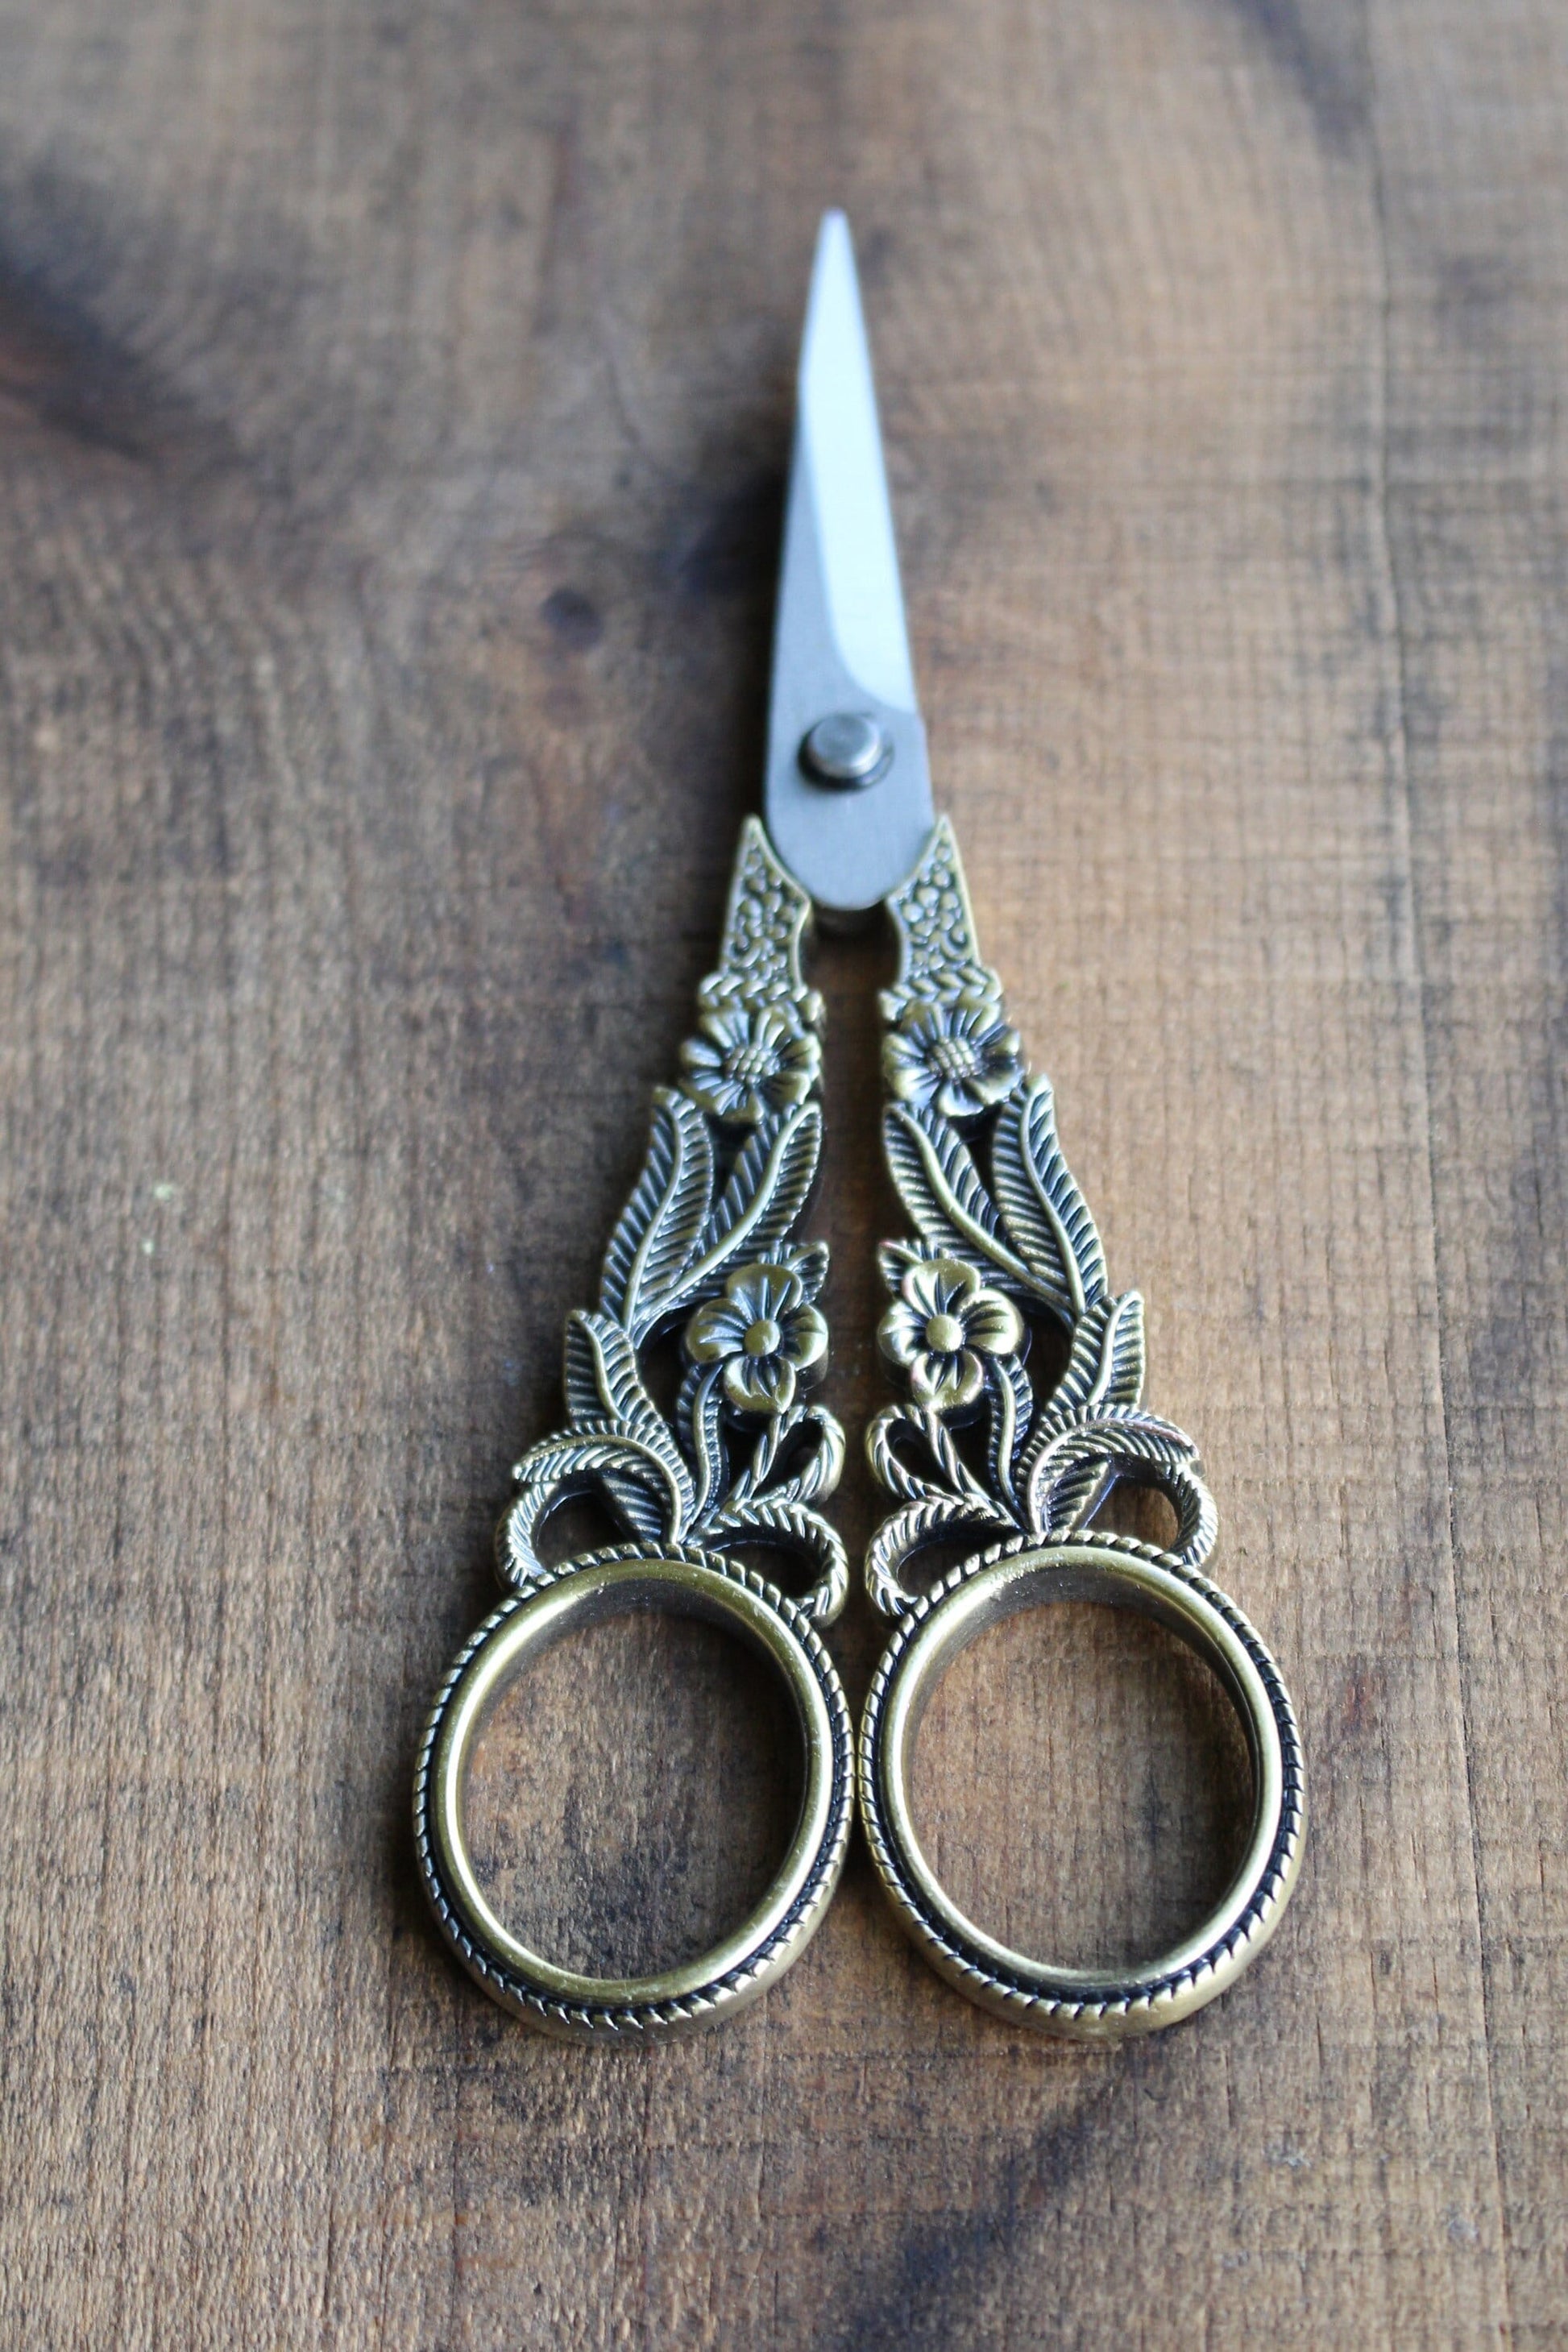 Floral Trellis Embroidery Scissors in antique gold